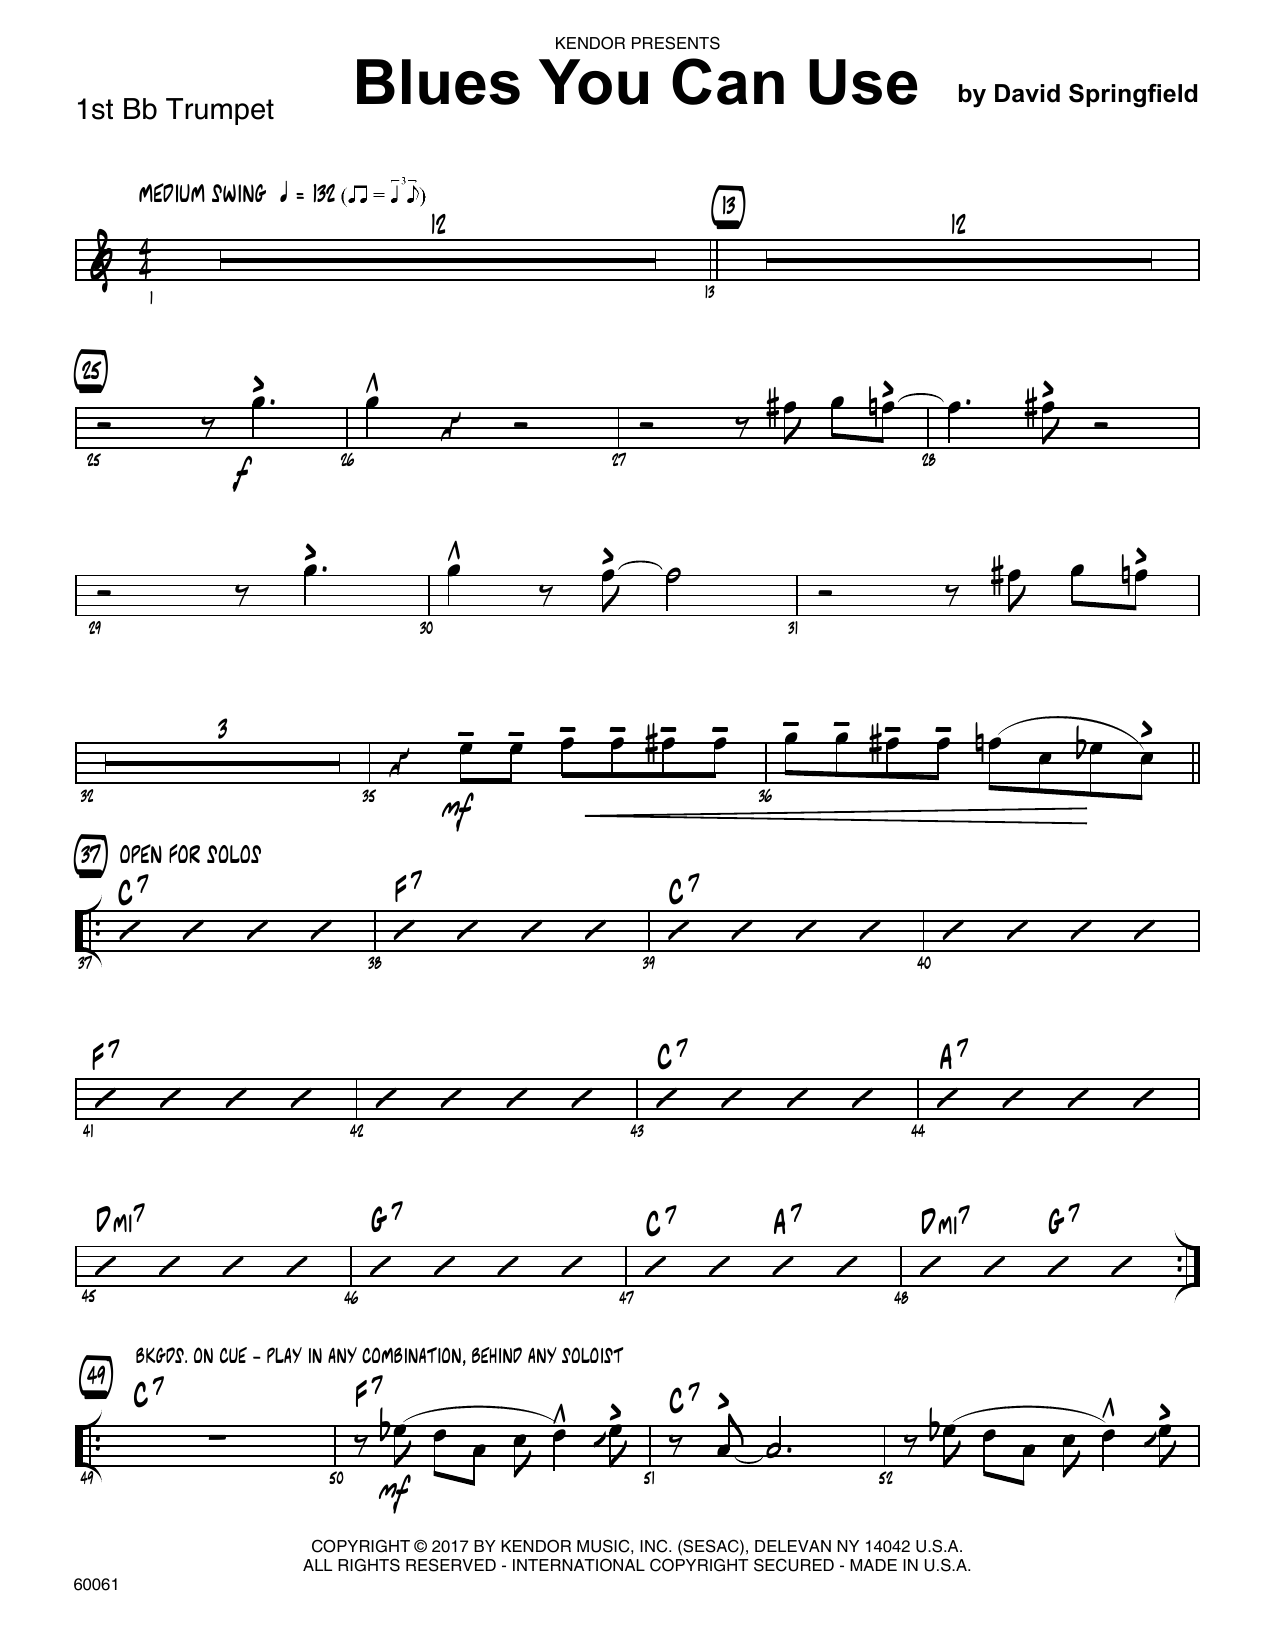 Download David Springfield Blues You Can Use - 1st Bb Trumpet Sheet Music